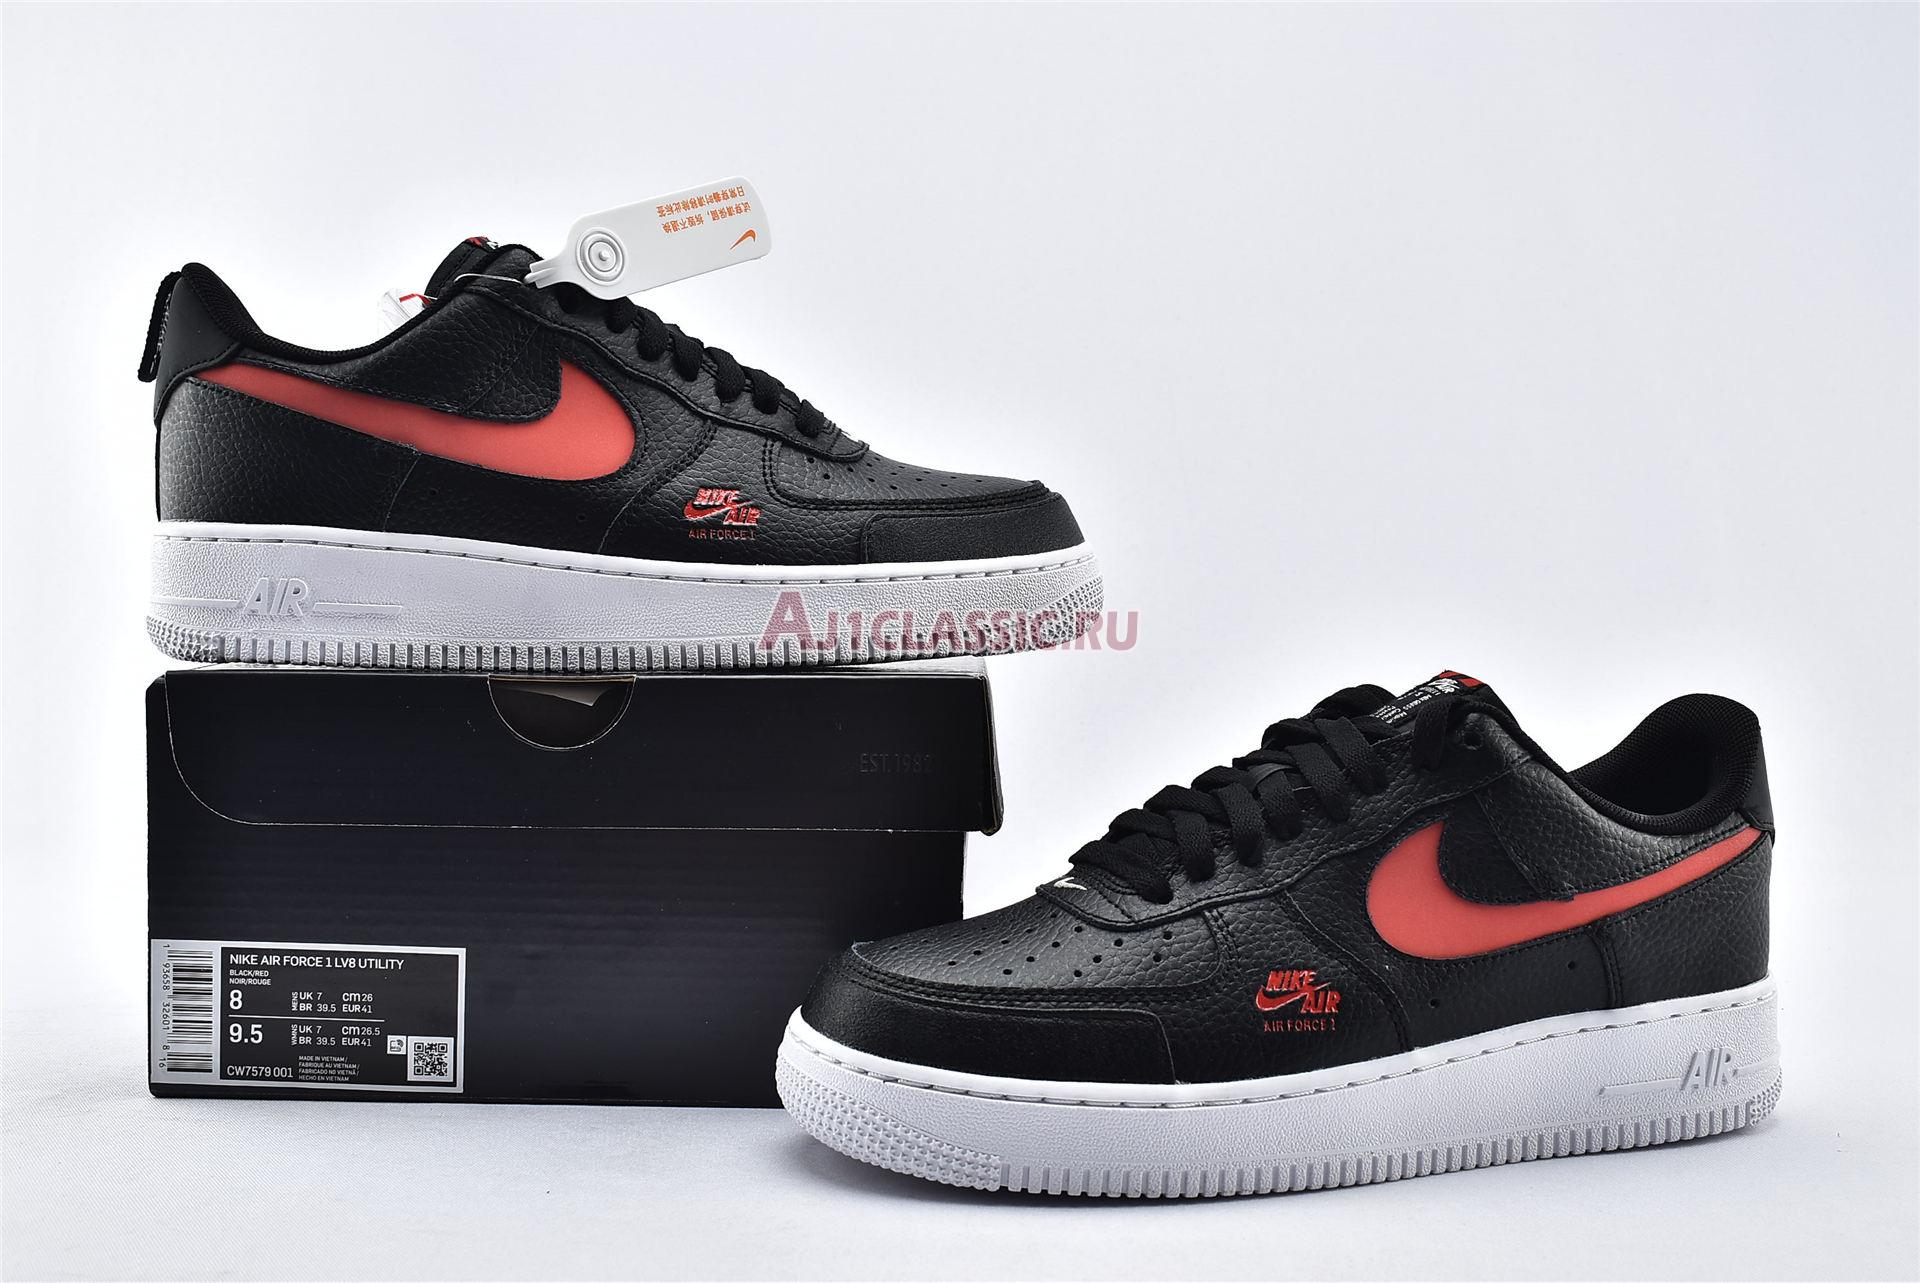 Nike Air Force 1 Low LV8 Utility "Bred" CW7579-001